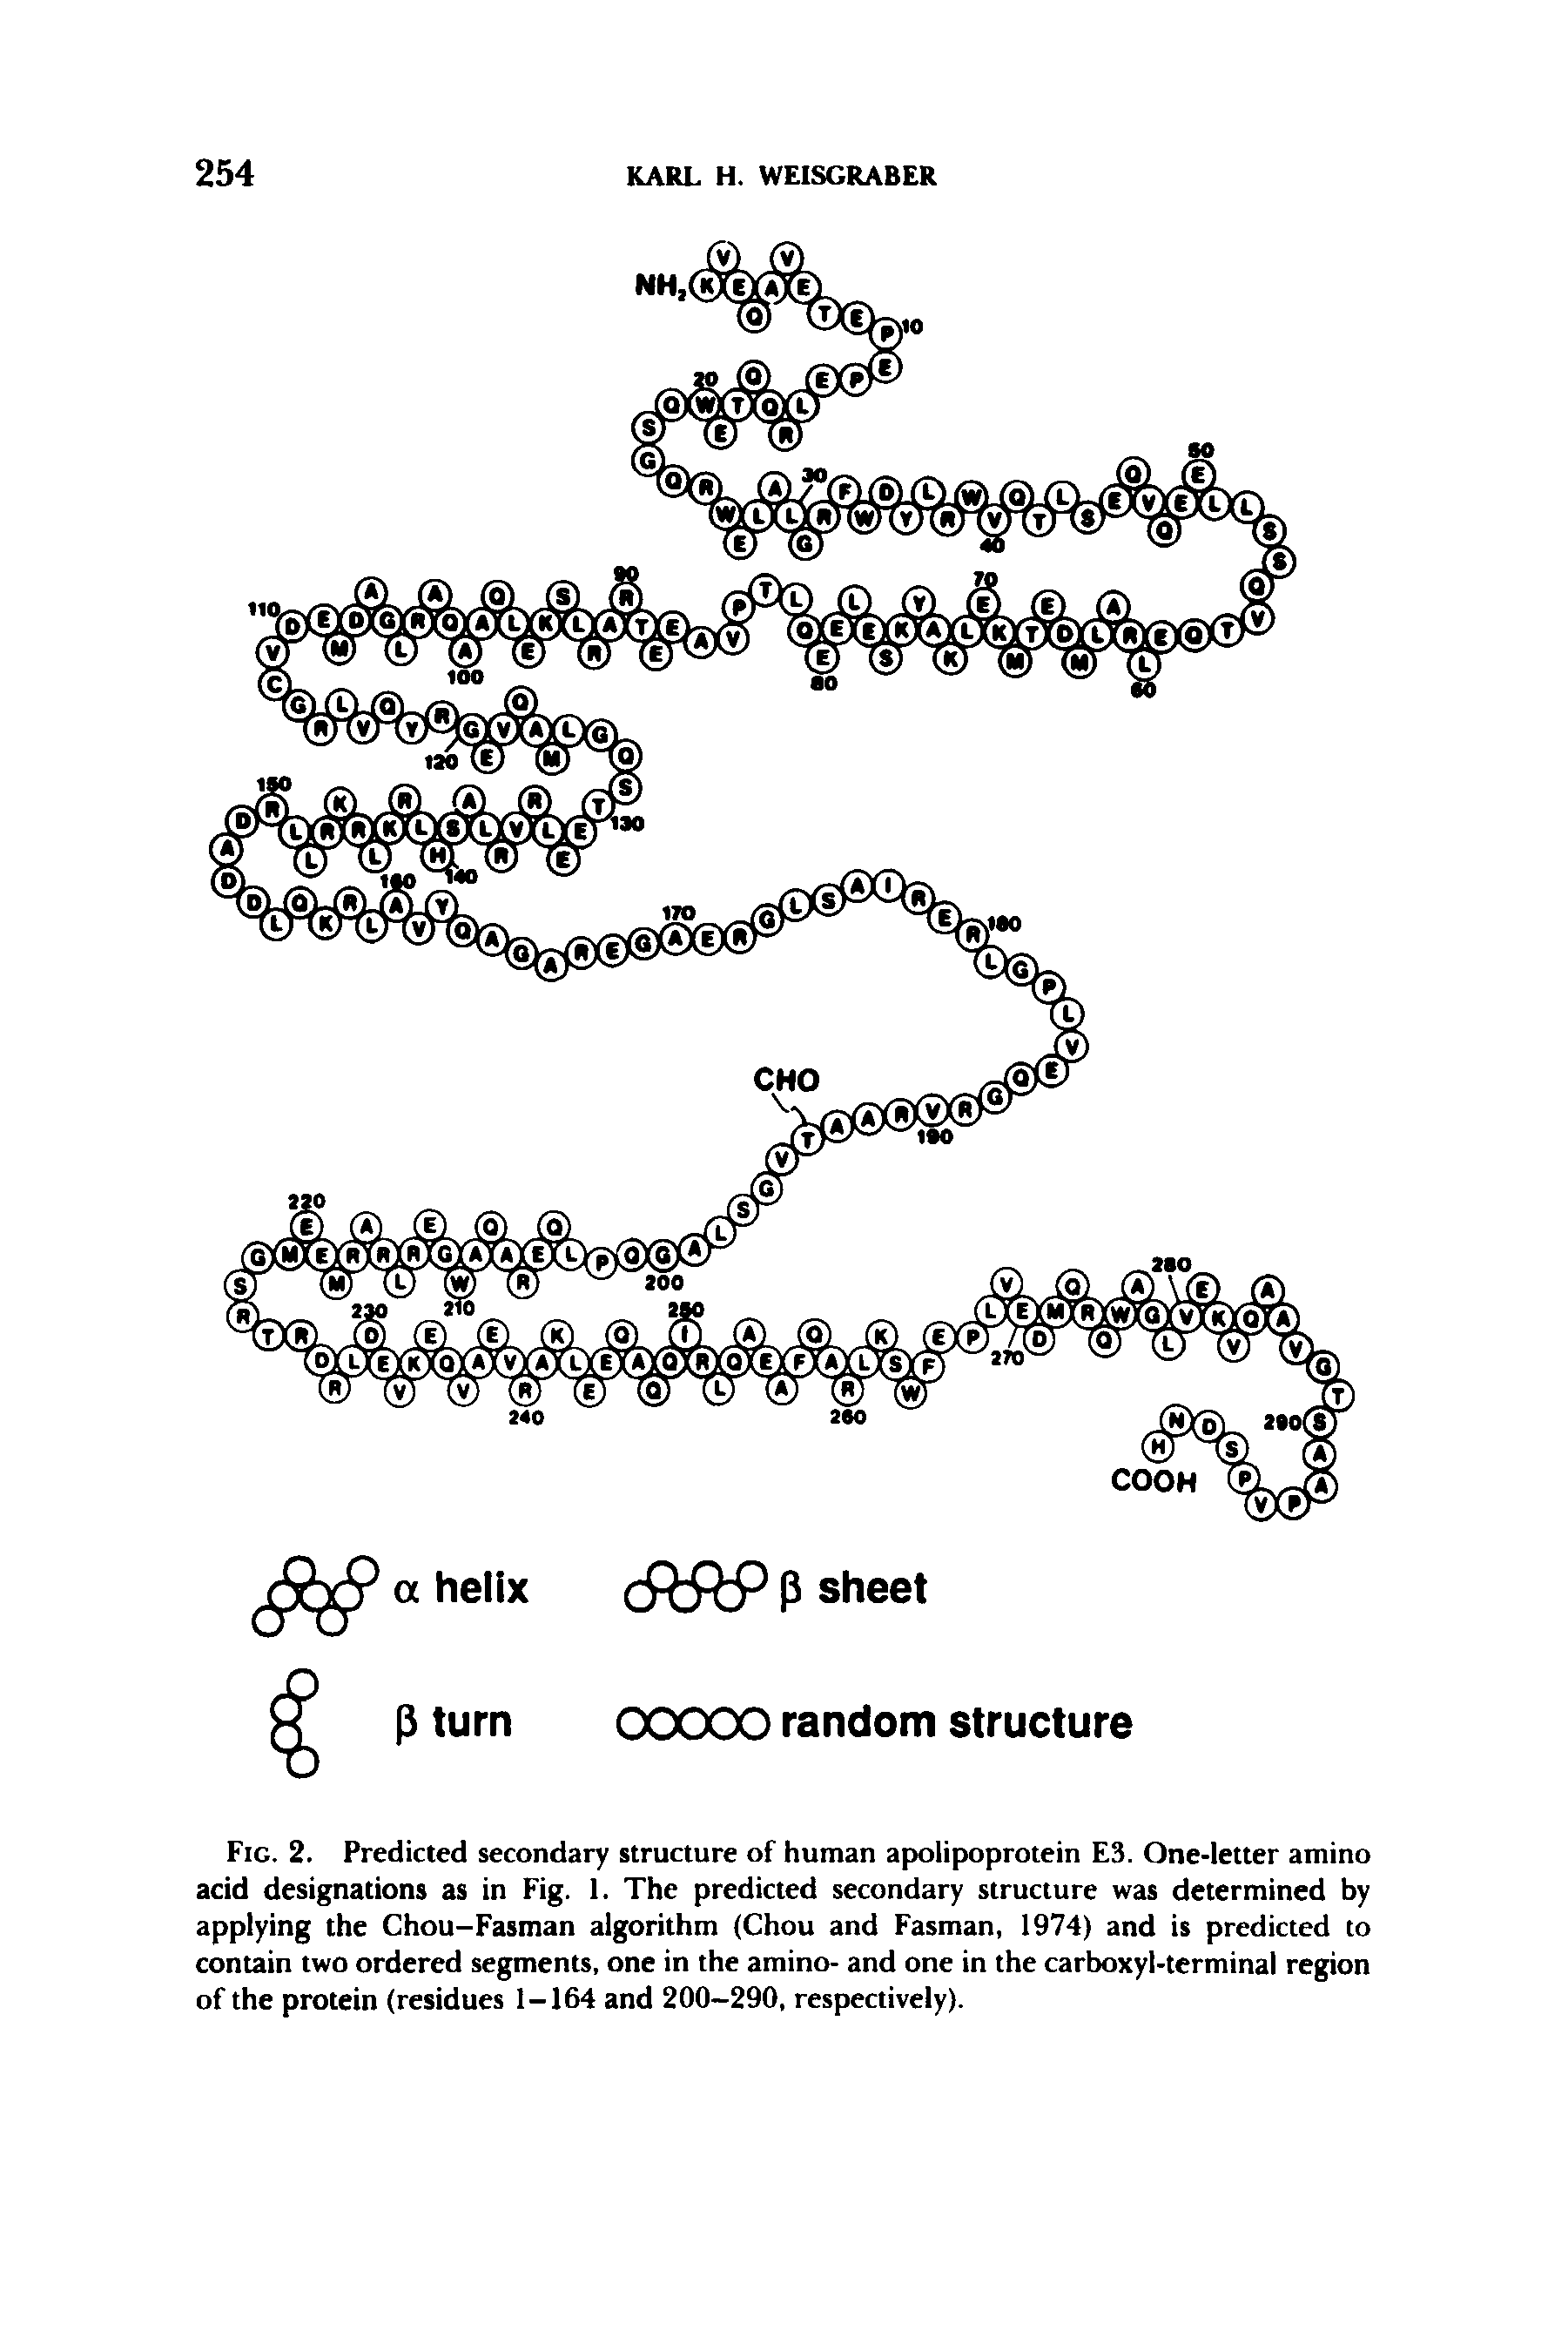 Fig. 2. Predicted secondary structure of human apolipoprotein E3. One-letter amino acid designations as in Fig. 1. The predicted secondary structure was determined by applying the Chou-Fasman algorithm (Chou and Fasman, 1974) and is predicted to contain two ordered segments, one in the amino- and one in the carboxyl-terminal region of the protein (residues 1-164 and 200-290, respectively).